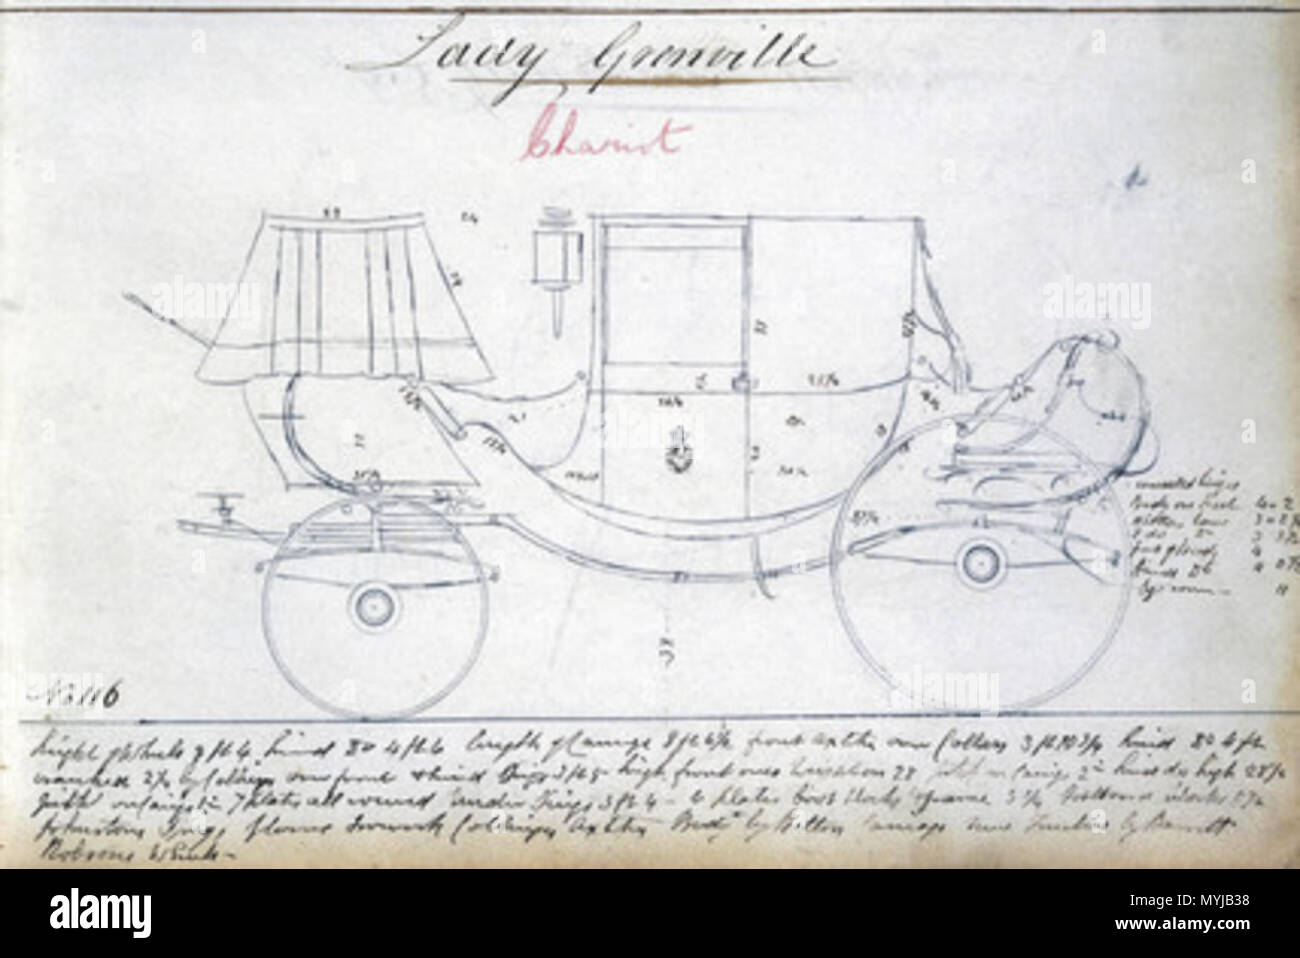 . Lady Grenville's chariot, c 1810-1873 Plate from 'Woodall's Coach Designs', produced between 1810 and 1873, showing a design for a four-wheeled carriage produced for Lady Greville. 'Woodall's Coach Designs' is a bound volume containing draughtsman's drawings for Woodall the coachmaker of London. 19th century. Unattributed 310 Lady Grenville's chariot, c 1810-1873 Stock Photo